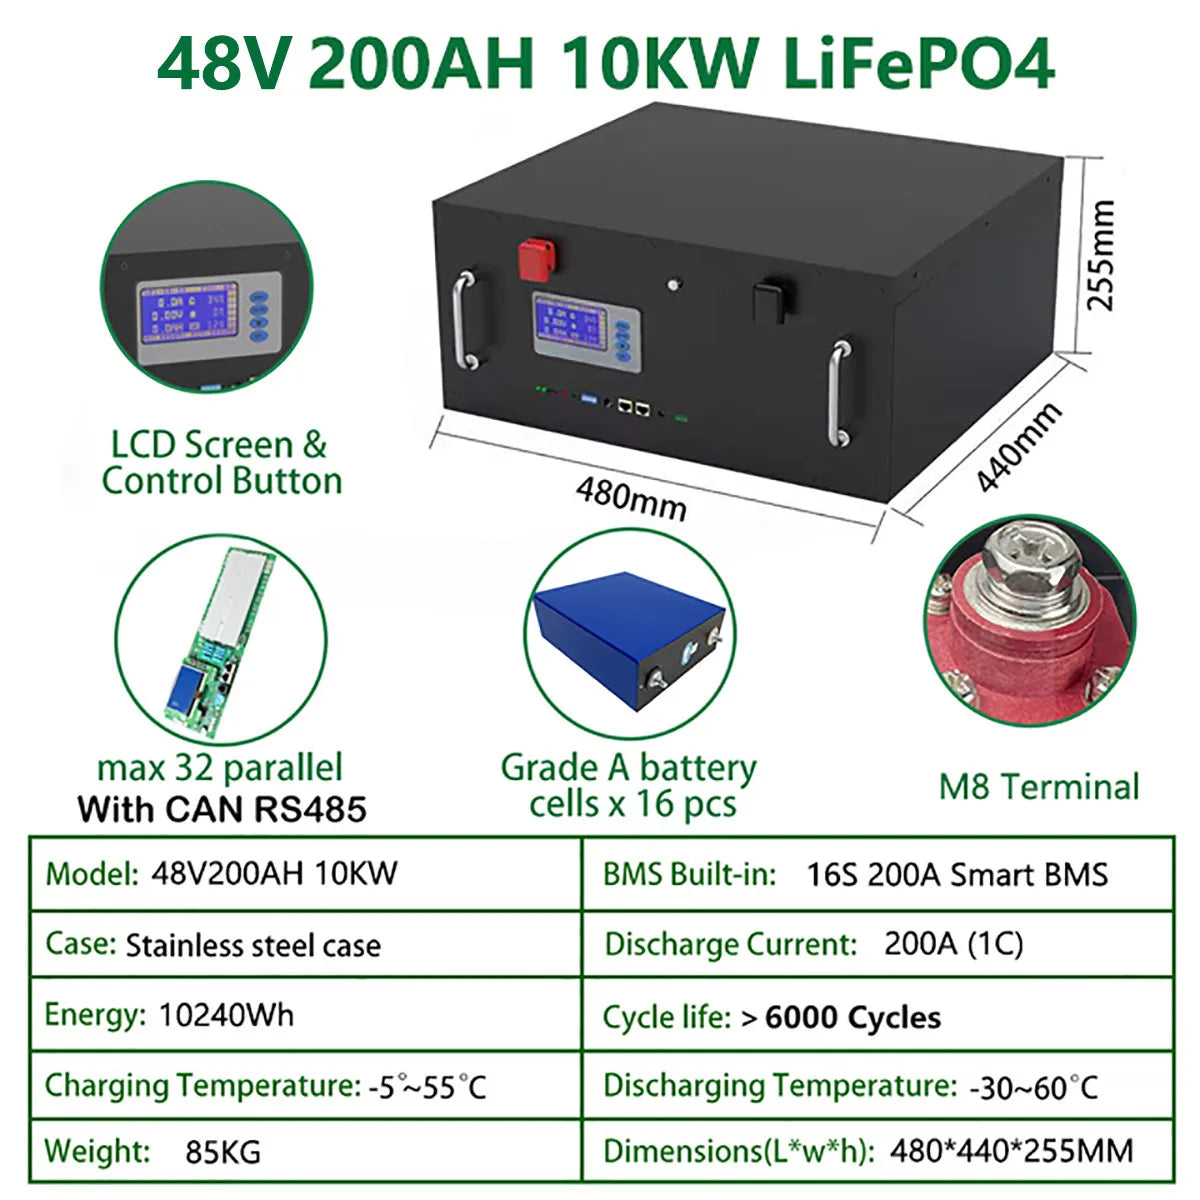 LiFePO4 48V 200AH 10KW Battery, High-capacity lithium-ion battery pack for solar systems and inverters.